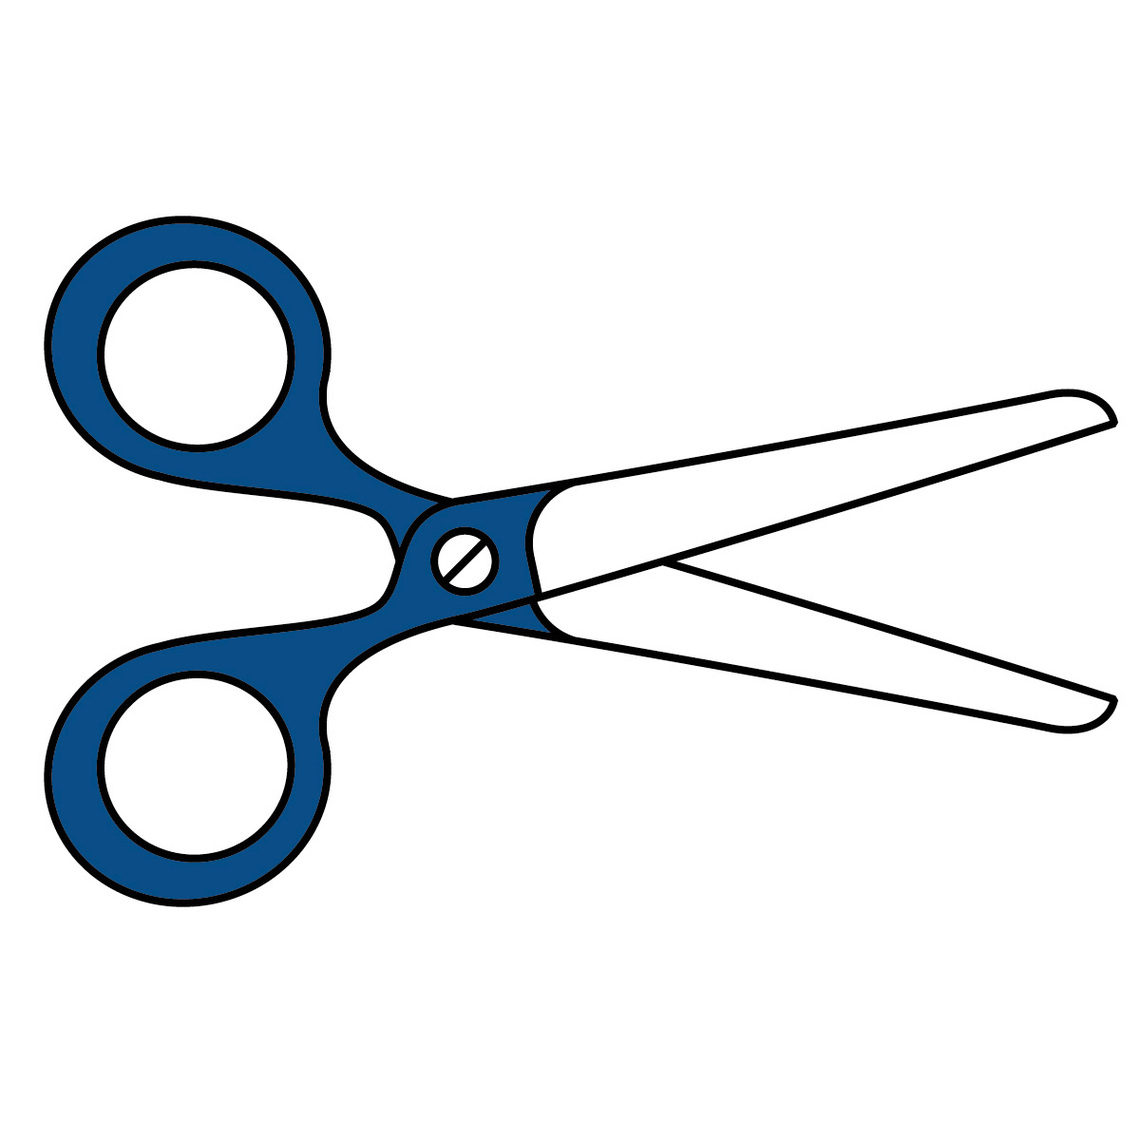 Cartoon Scissors Png Free Clipart - Free to use Clip Art Resource - ClipArt  Best - ClipArt Best